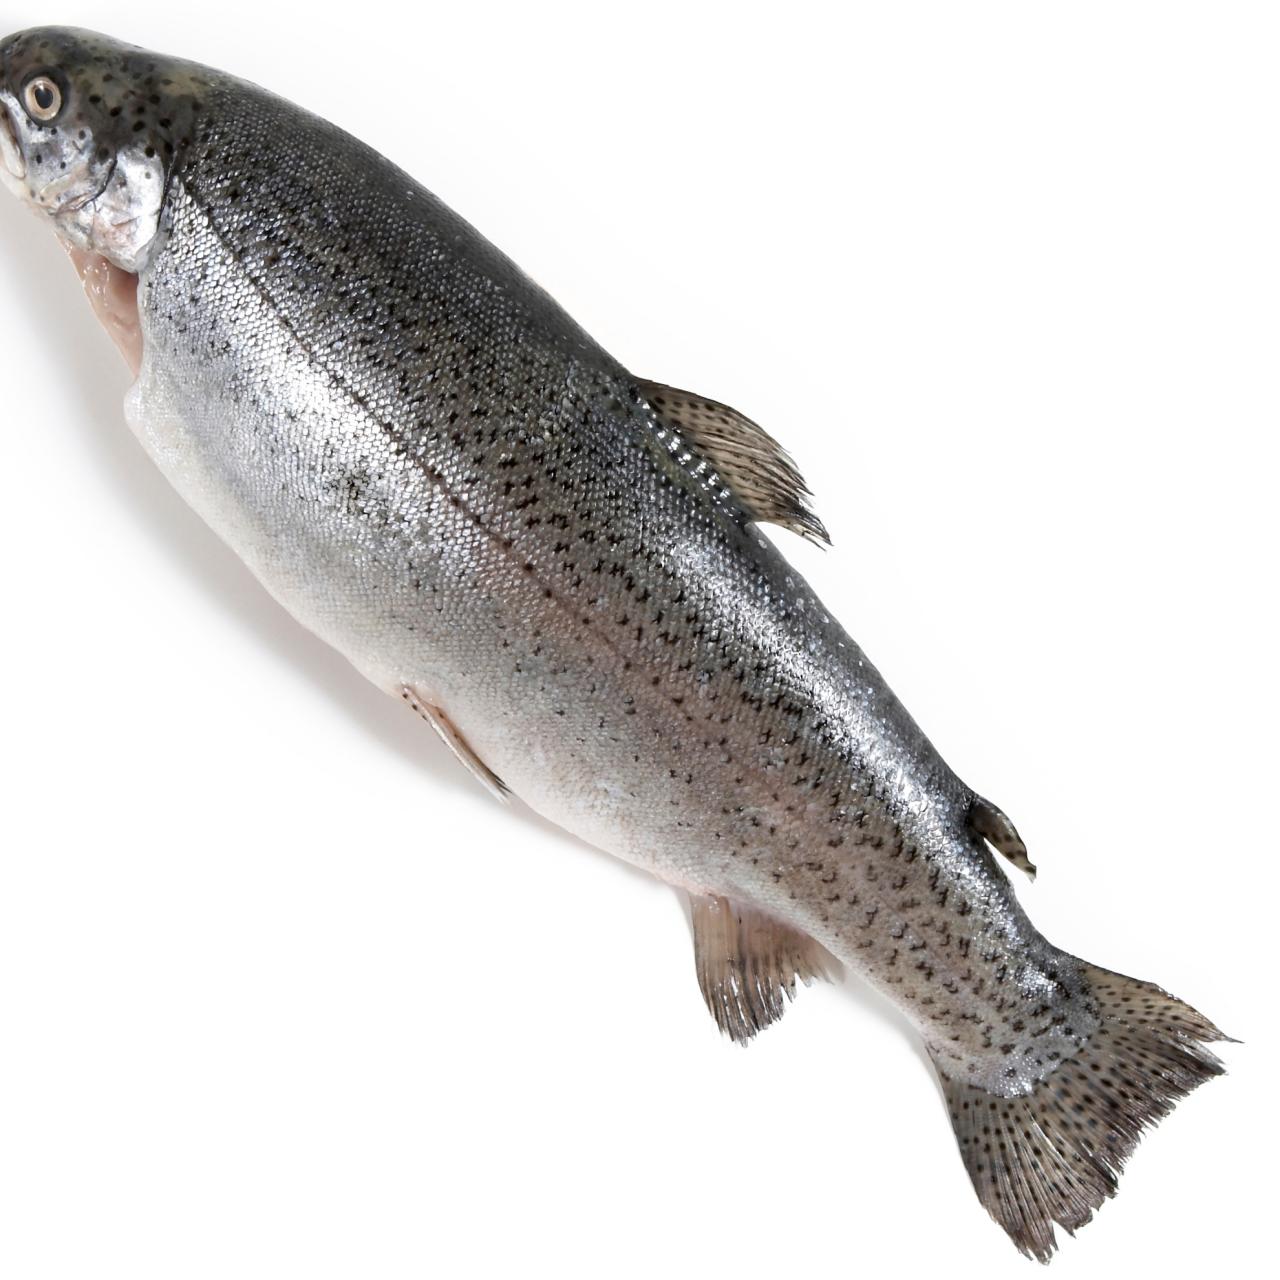 A Guide to Buying and Cooking Trout : Recipes and Cooking : Food Network, Recipes, Dinners and Easy Meal Ideas